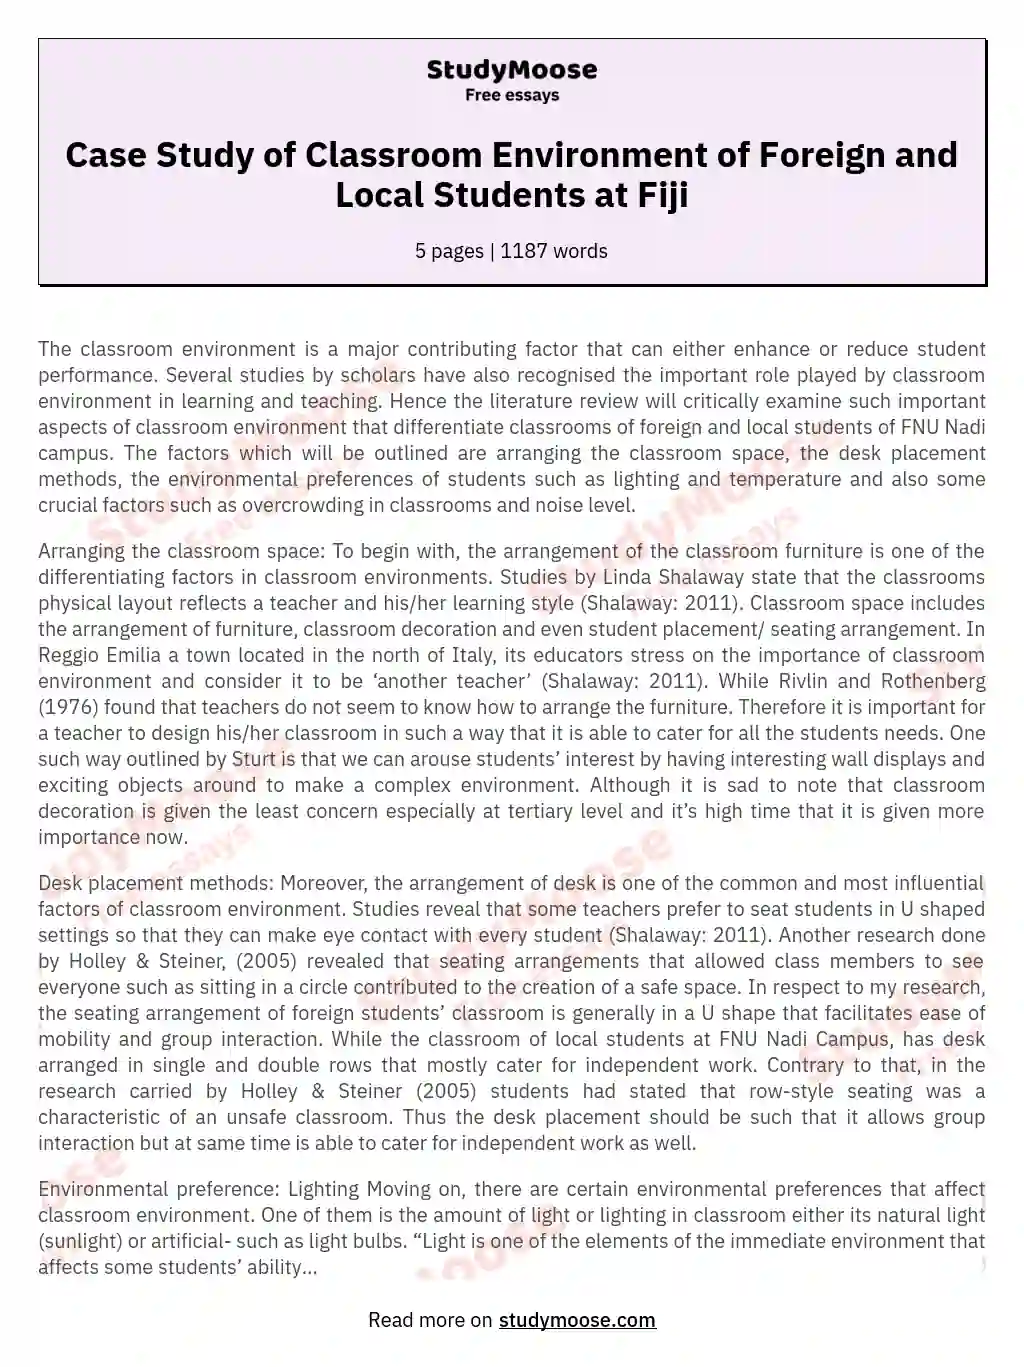 Case Study of Classroom Environment of Foreign and Local Students at Fiji essay